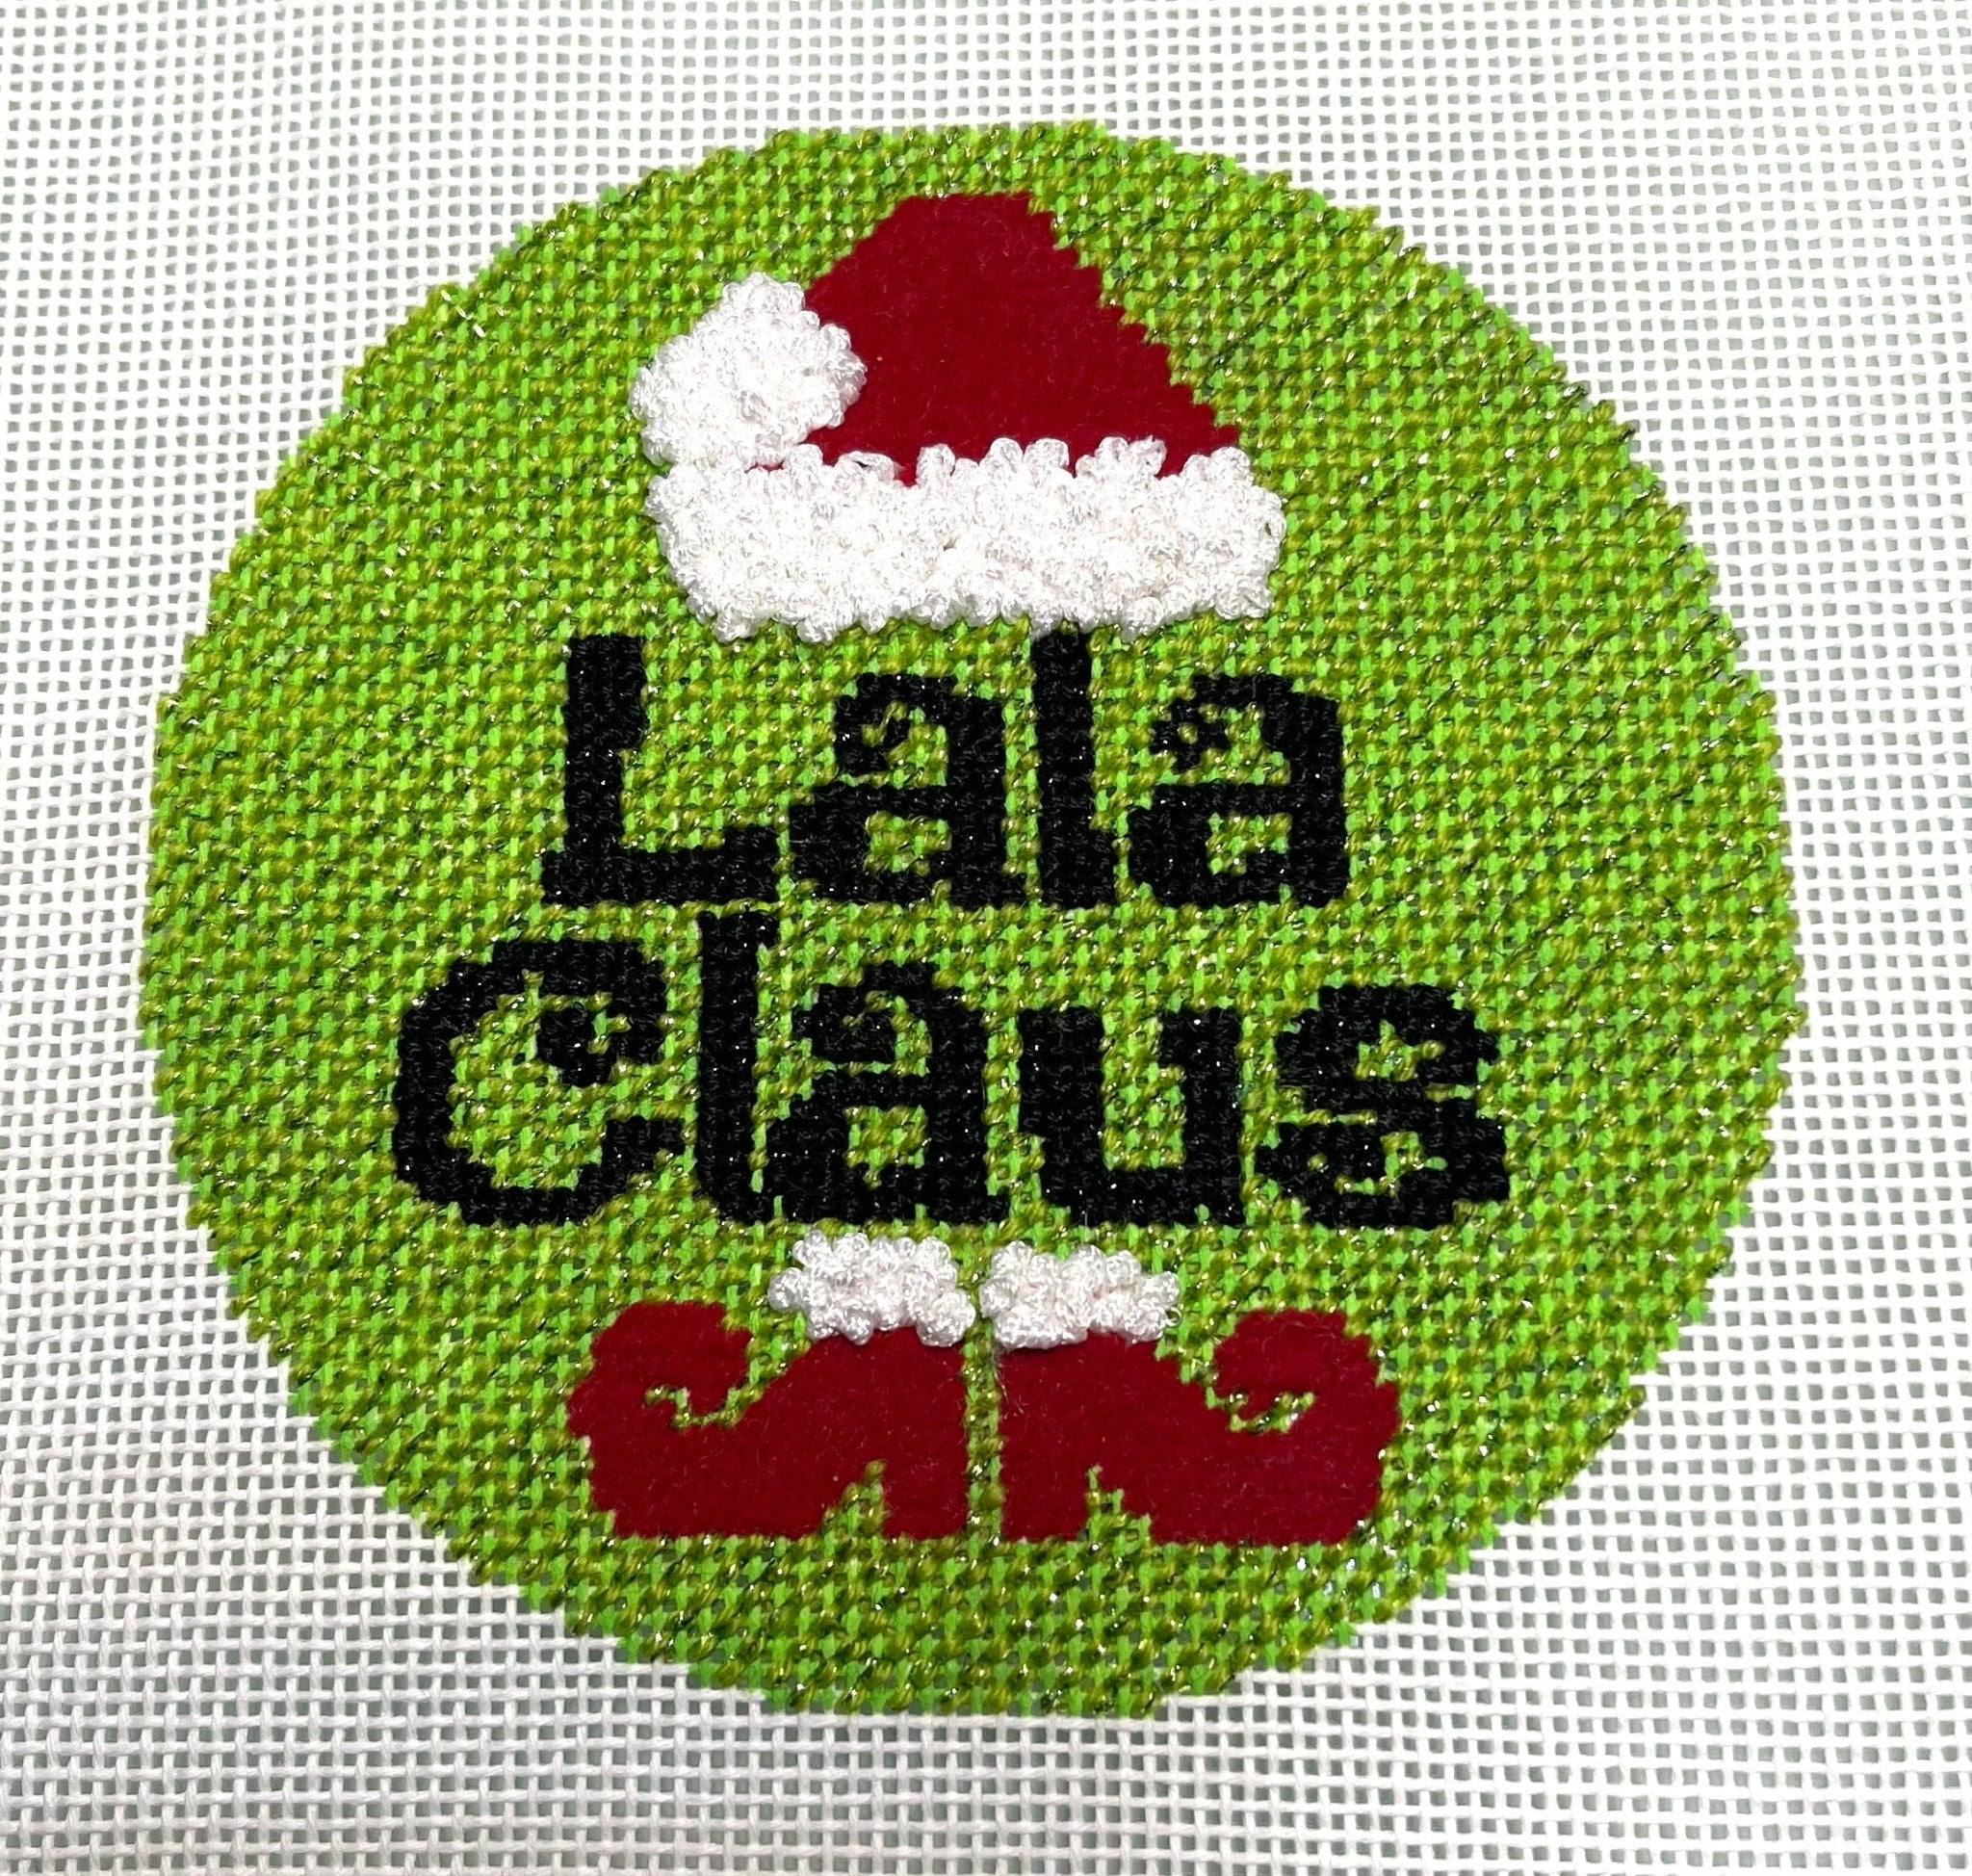 Mamaw Claus - Needlepoint by Laura